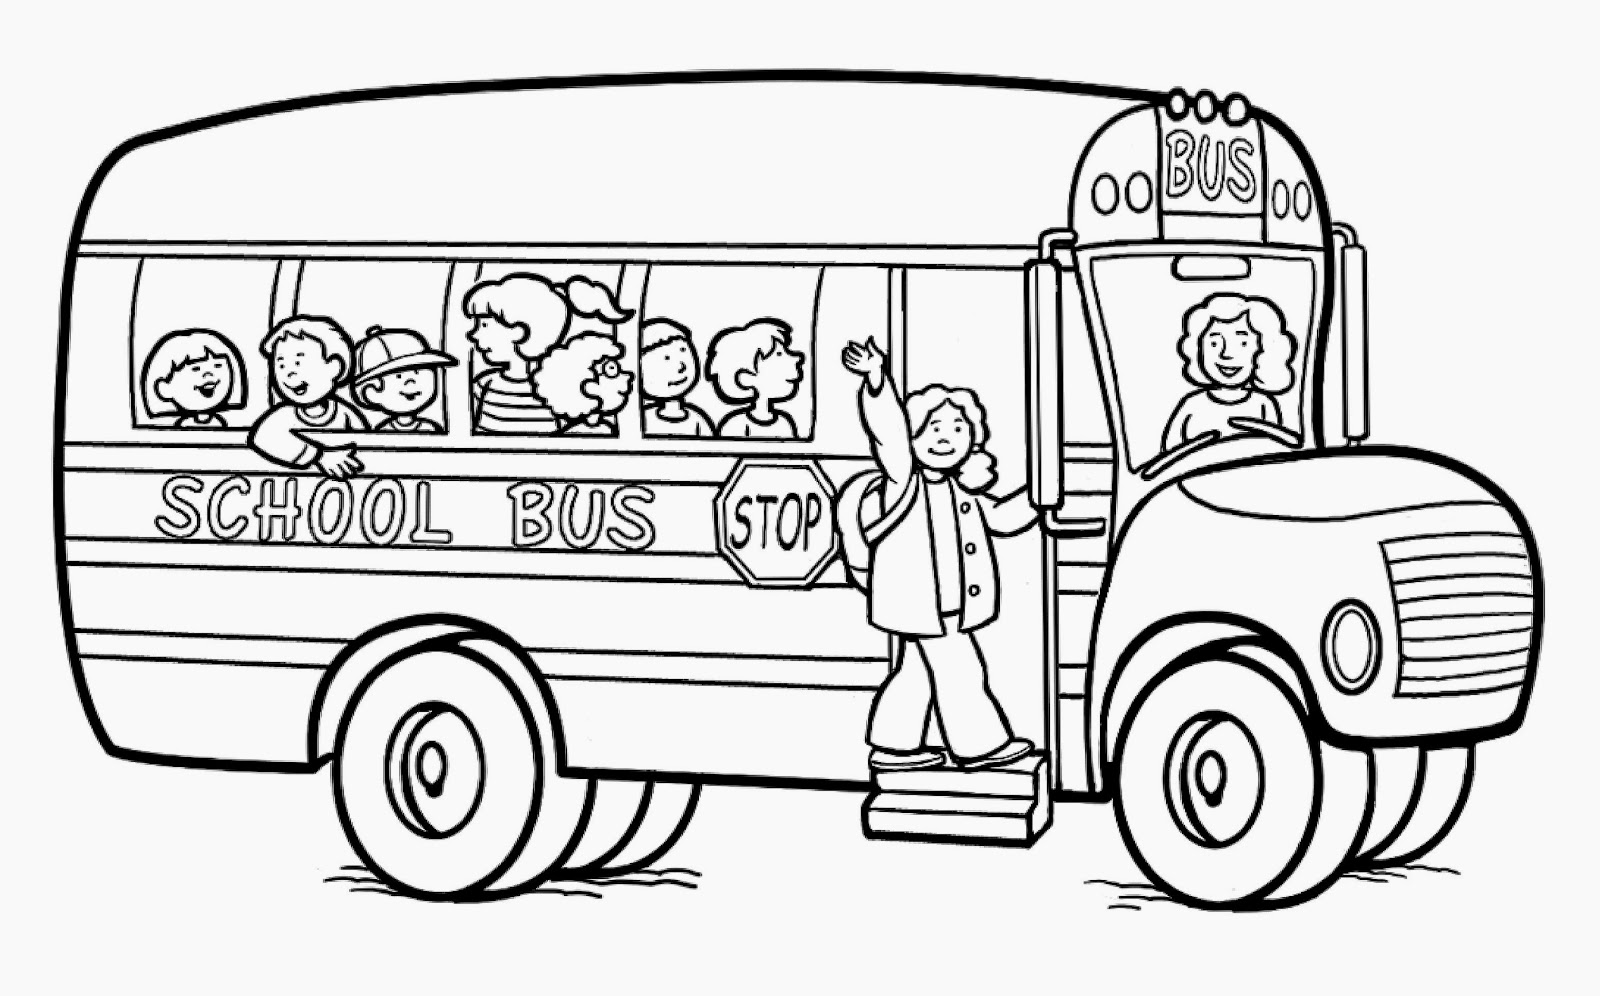 Wheels On The Bus Coloring Pages.